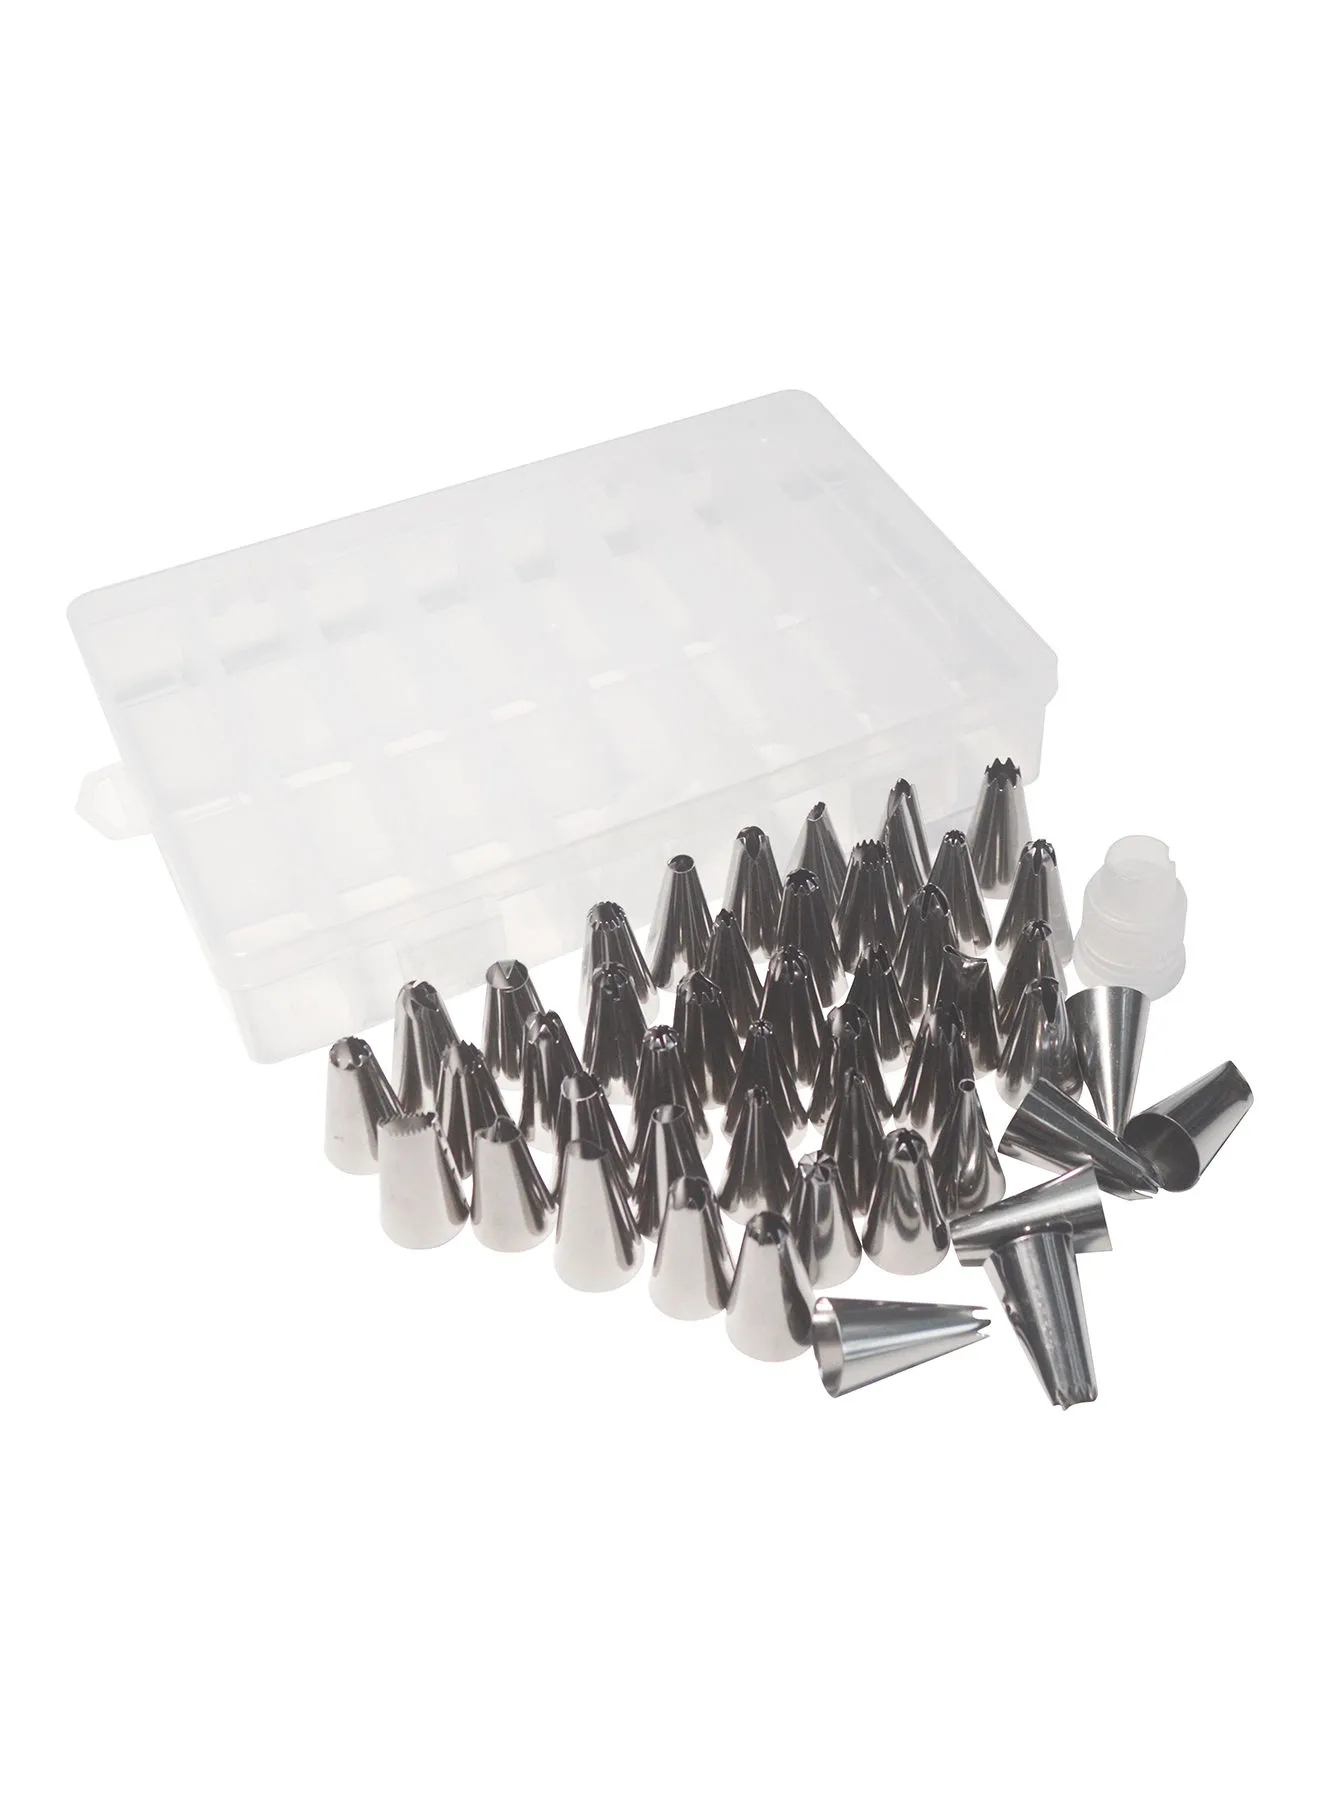 Amal Piping Tips - Made Of Stainless Steel - Reusable - Cake Decorating Tools - Baking Tools - Silver